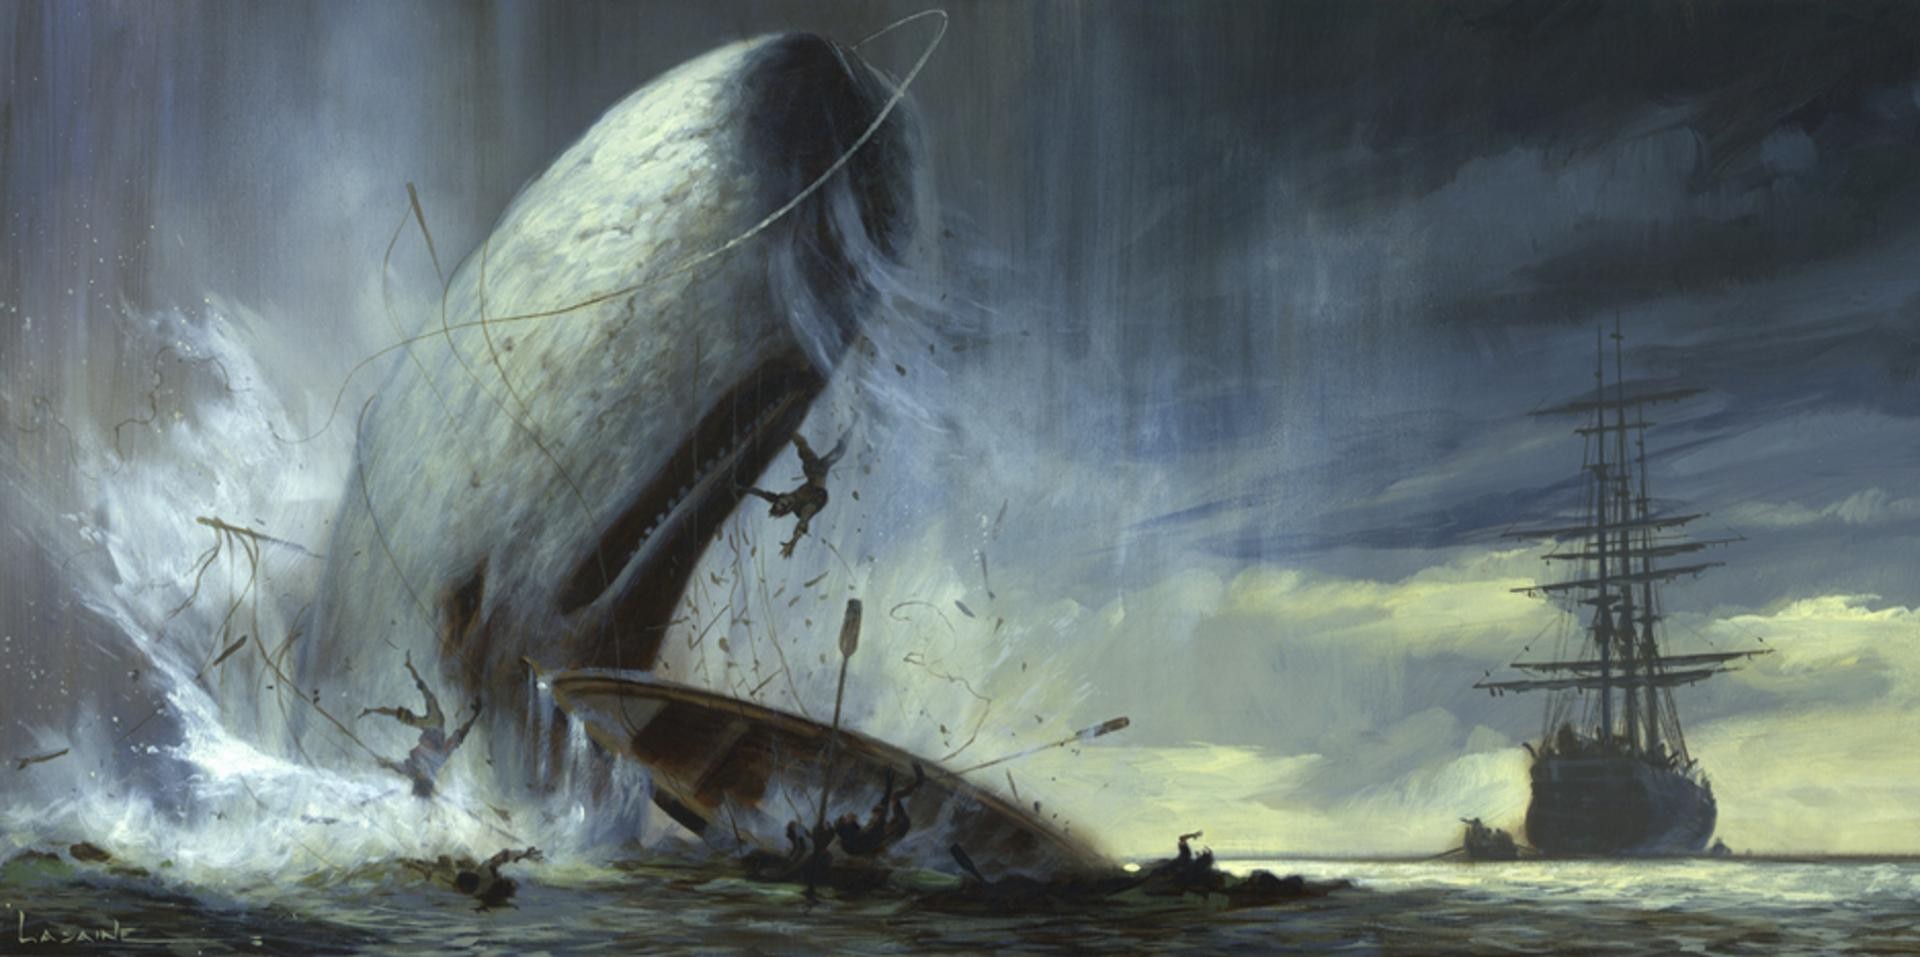 General 1920x957 nature animals sea Moby Dick whale artwork waves ship boat men fighting clouds